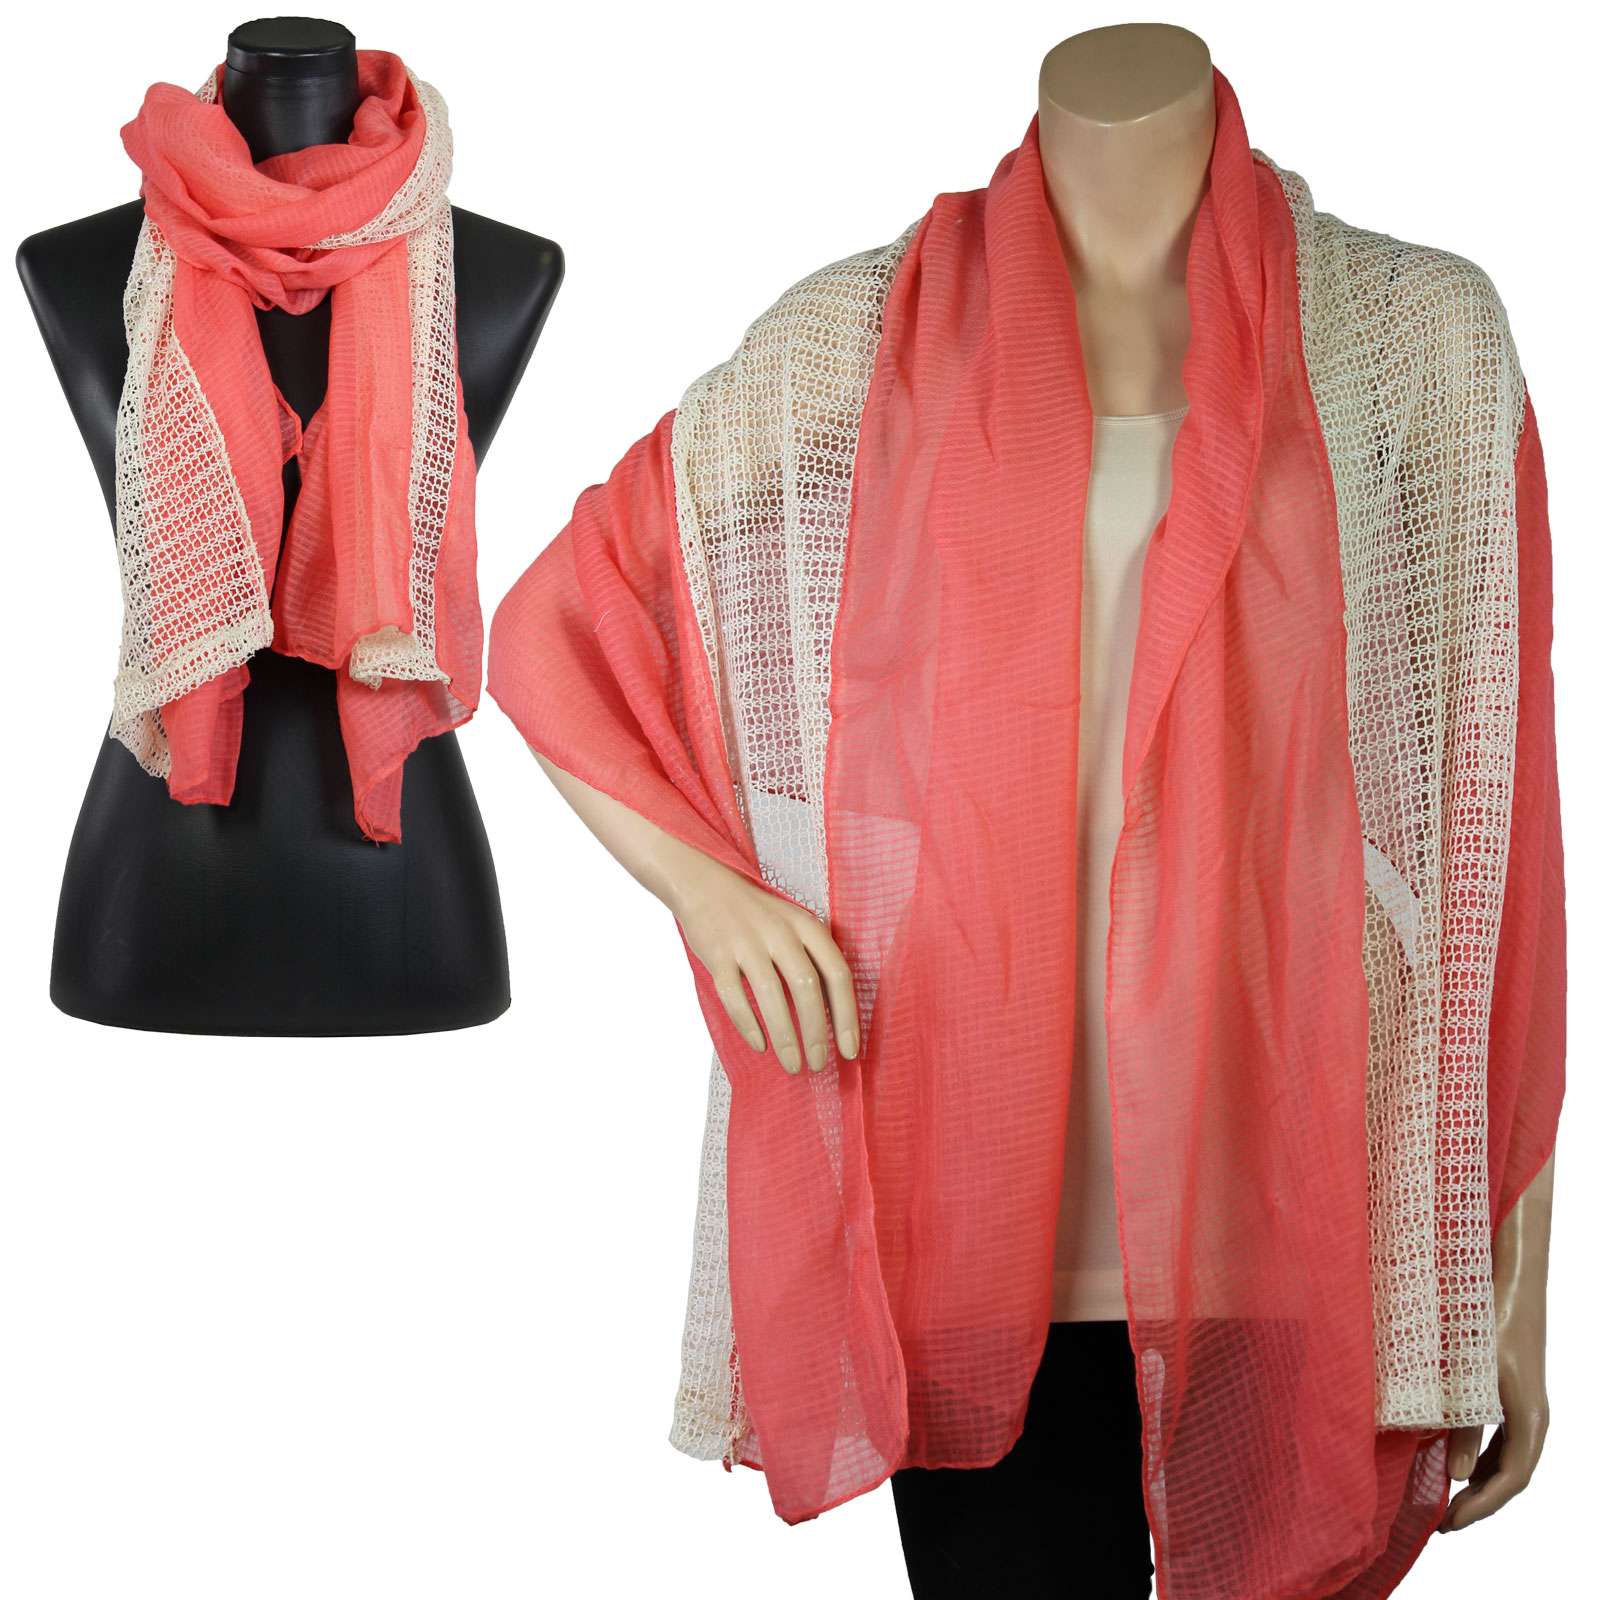 Lace w/ Solid Border 4135 - Coral